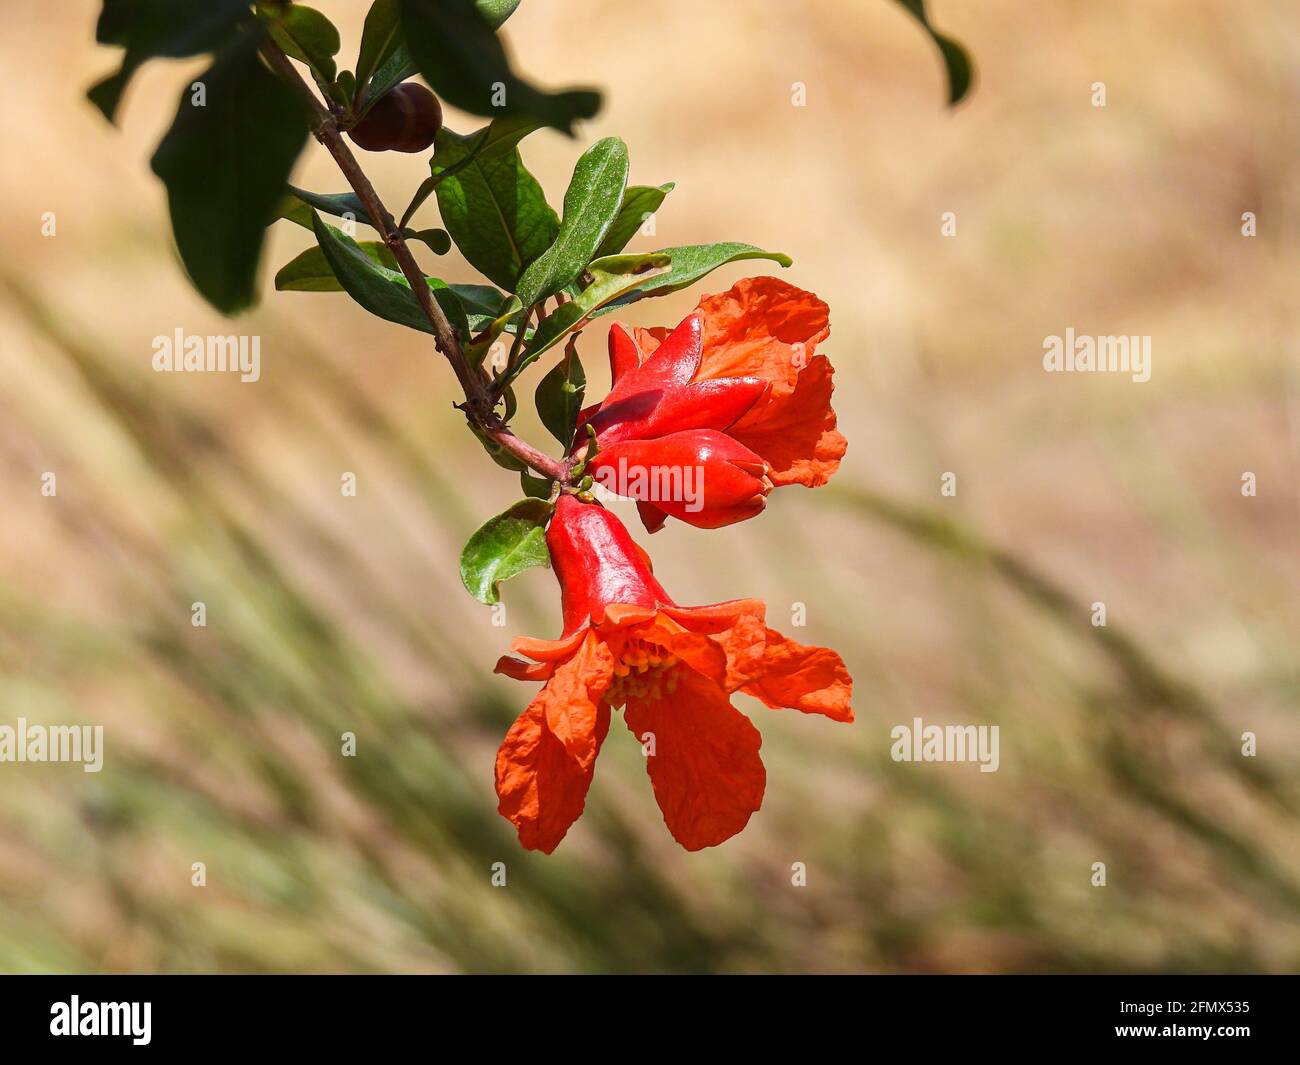 Branch with flowers and ovary of fruit of a pomegranate tree close up Stock Photo